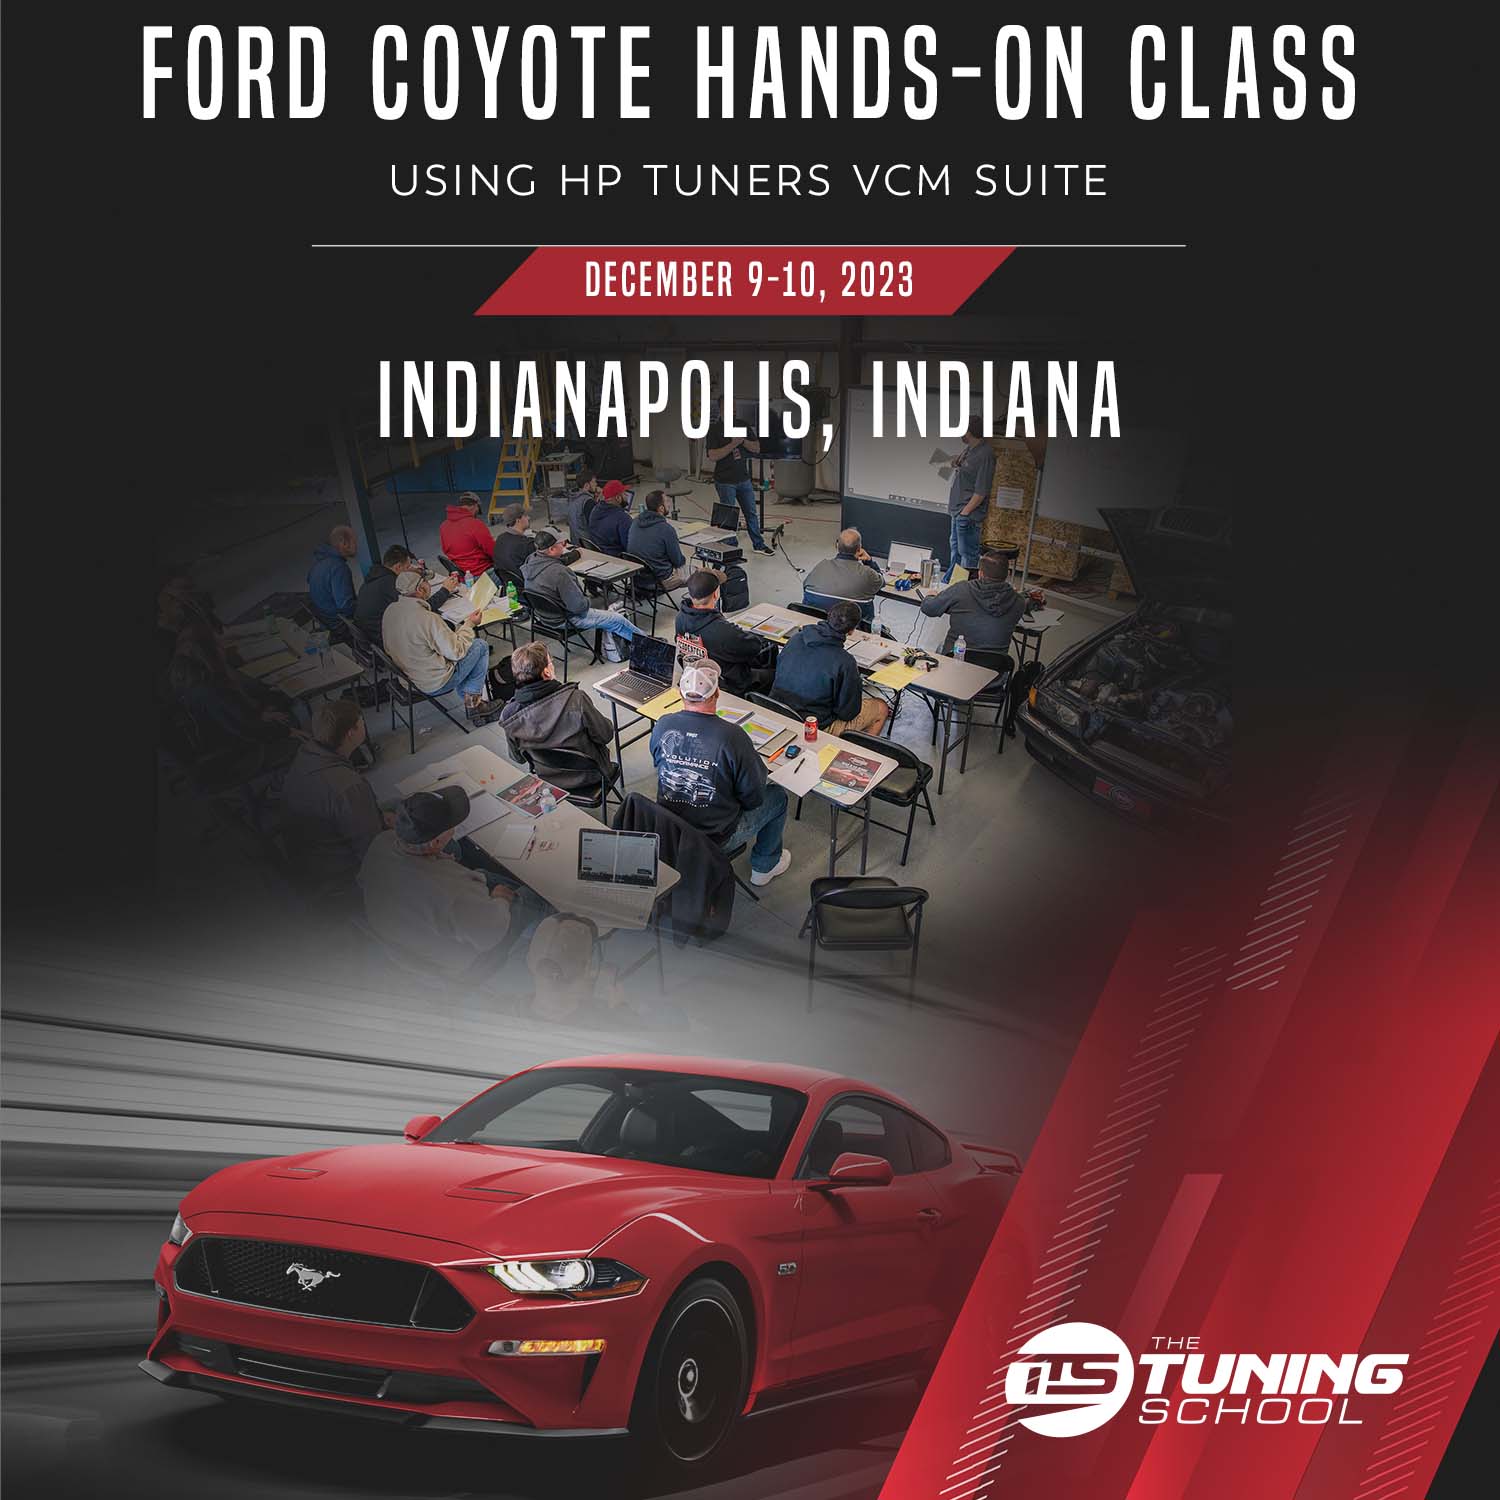 Ford Coyote Hands-On Class using HP Tuners - Indianapolis, December 2023